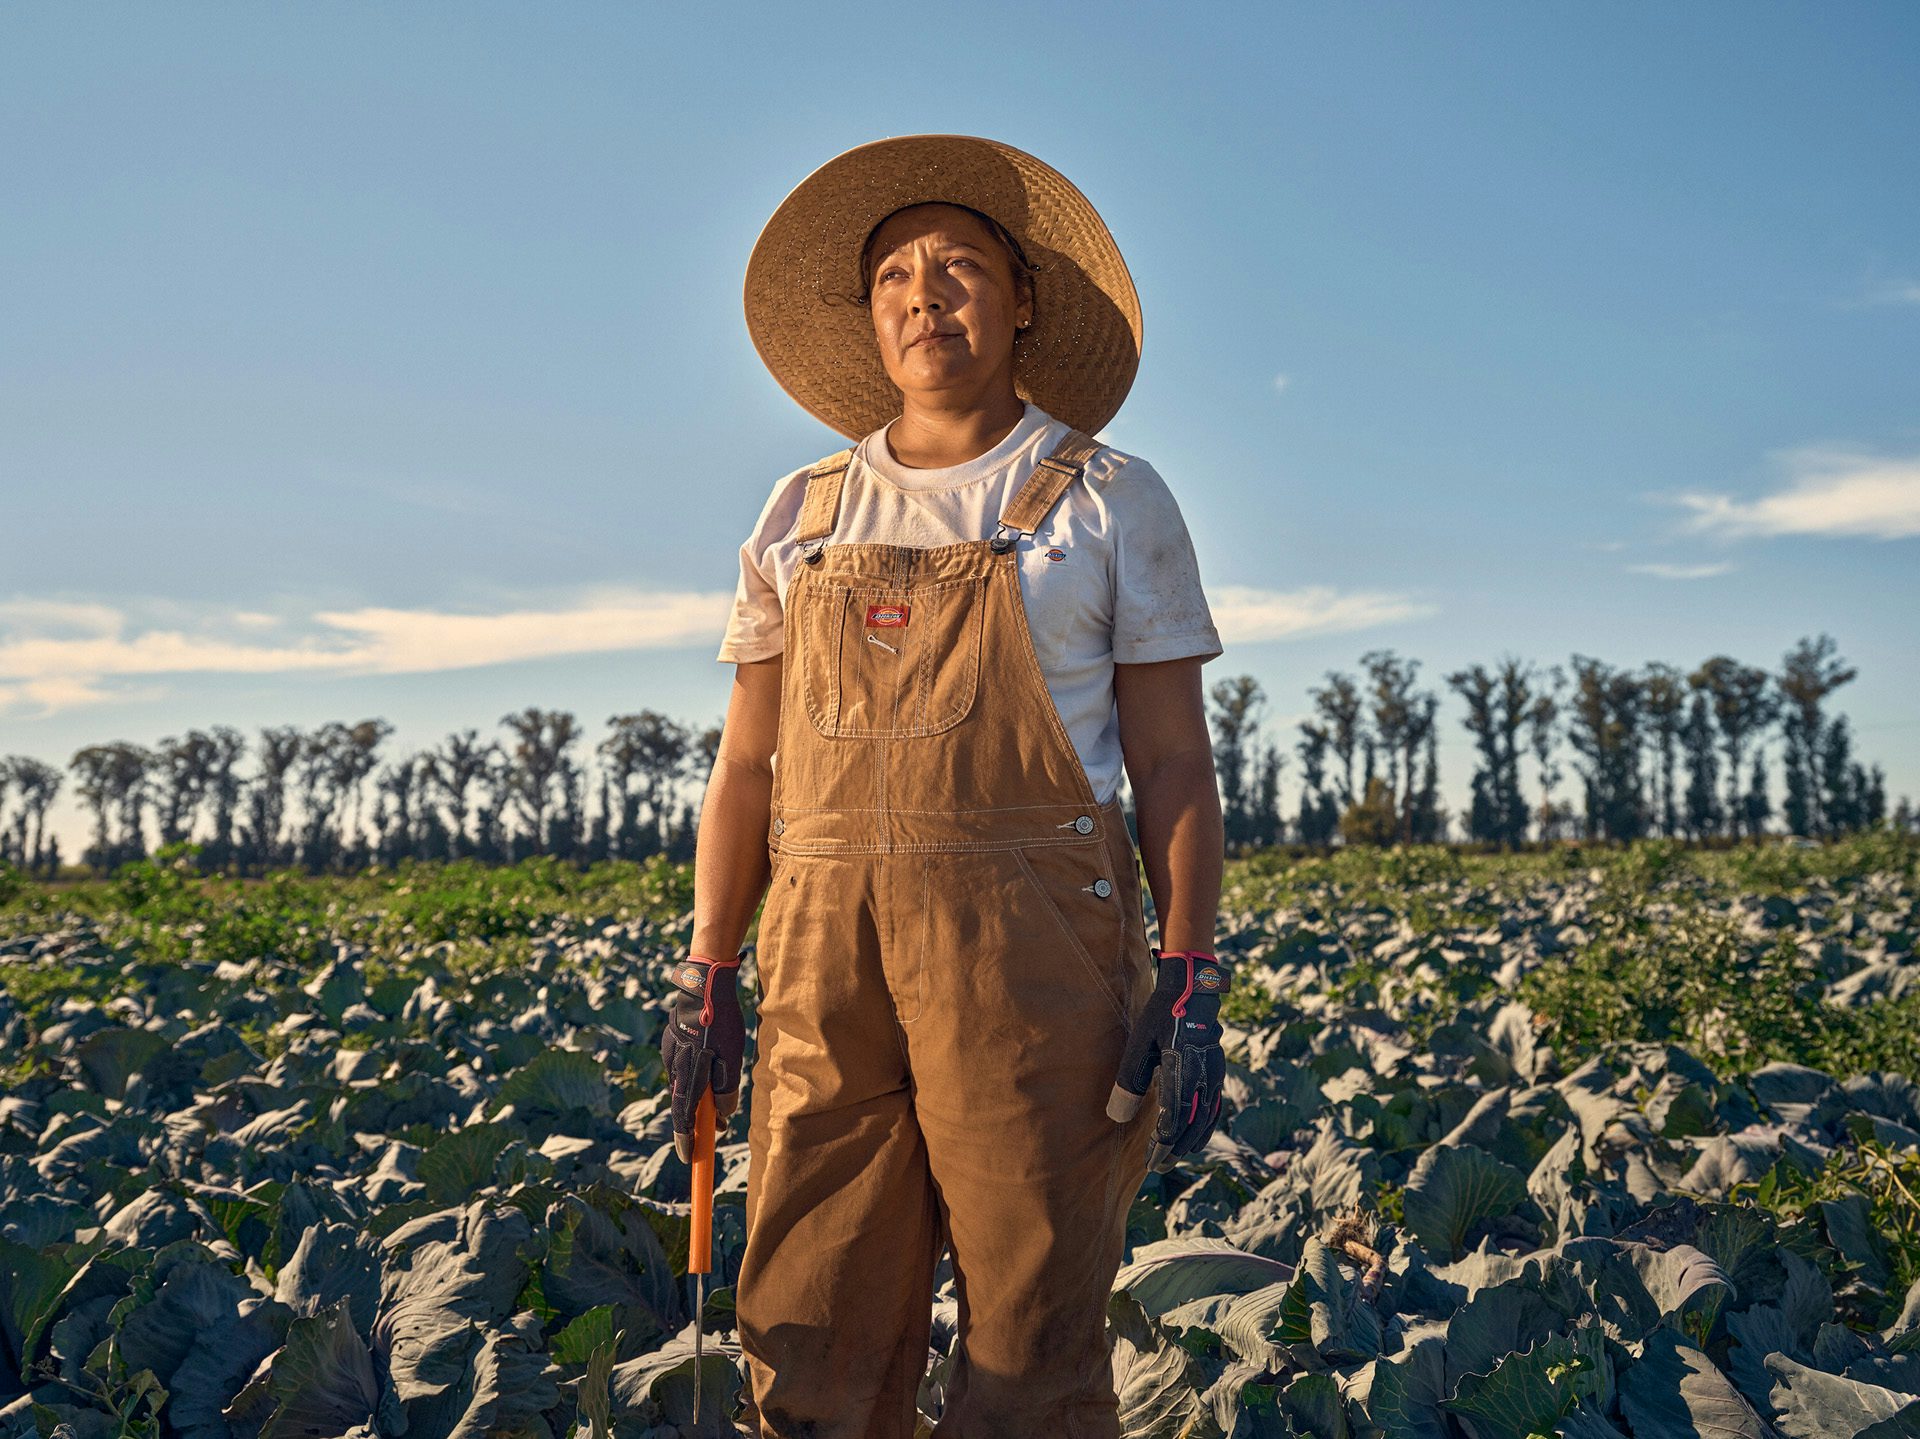 Photograph of a farmer stood in a field surrounded by crops in the Made in Dickies campaign